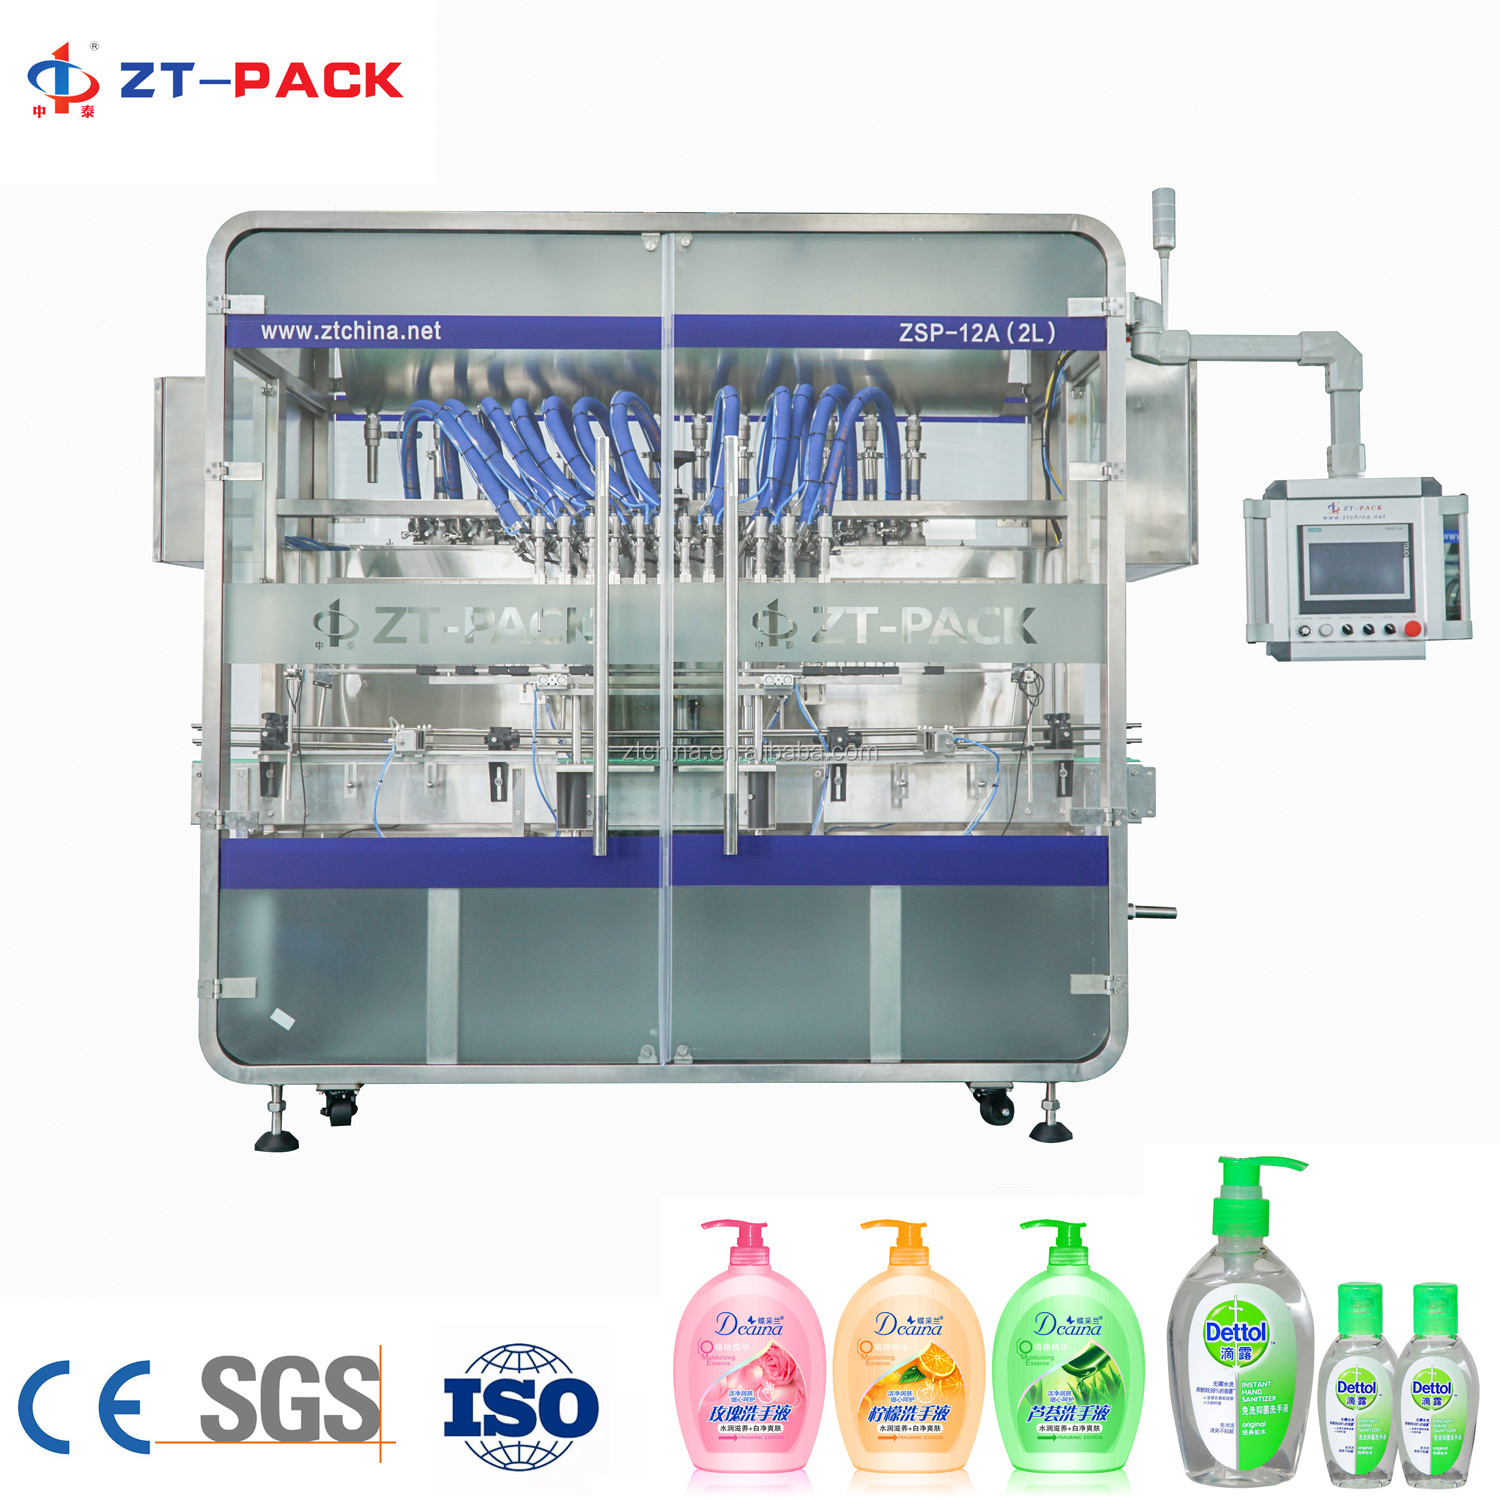 Automatic Hand Sanitizer Gel Filler Machine With High Performance For Liquid Detergent Laundry Hand Wash bleach Filling Machine